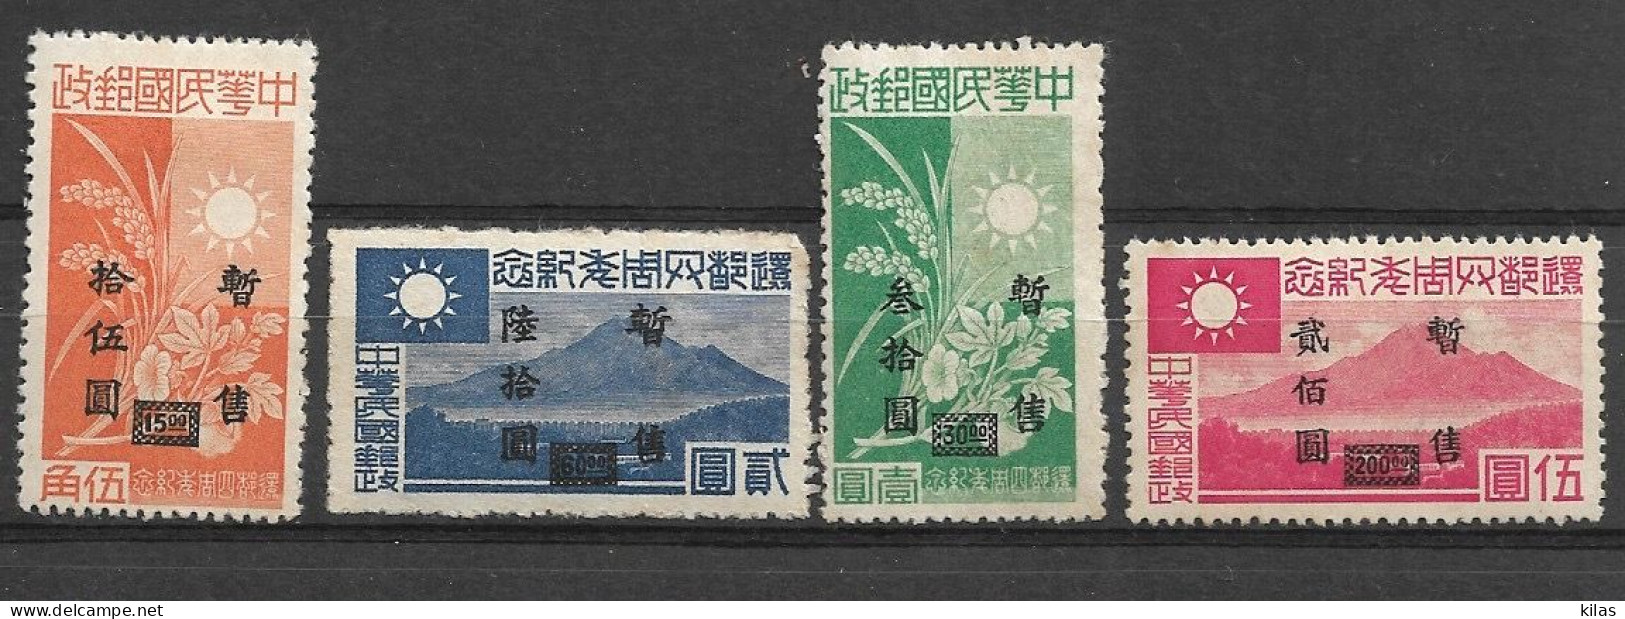 CHINA 1945 Japanese Occupation Of Shanghai Nankin MH - 1945 Occupazione Giapponese